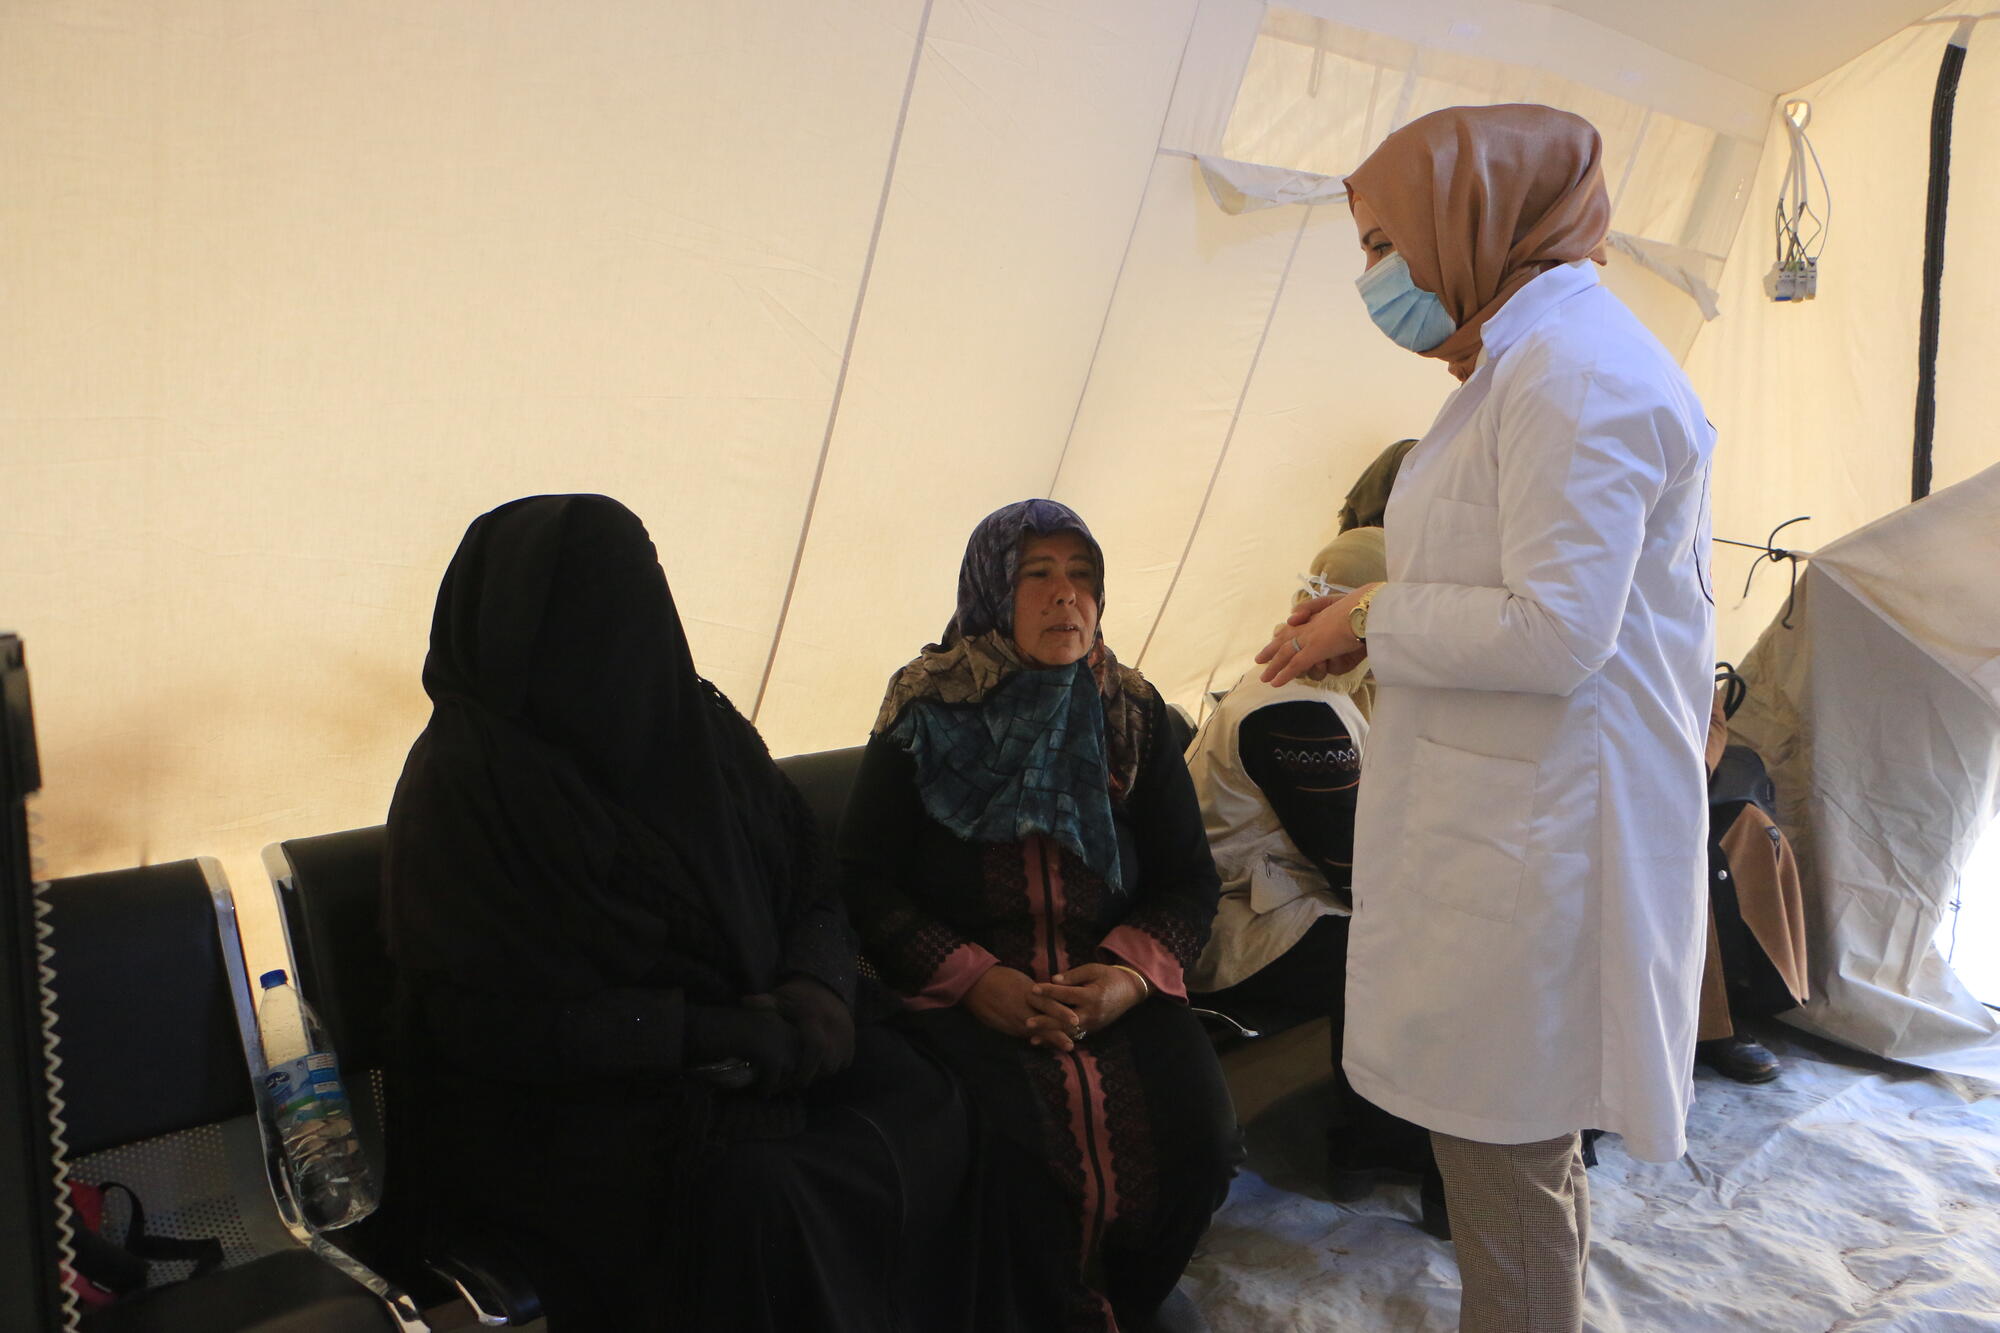 Health services for Syrian women caught up in war, foster safety